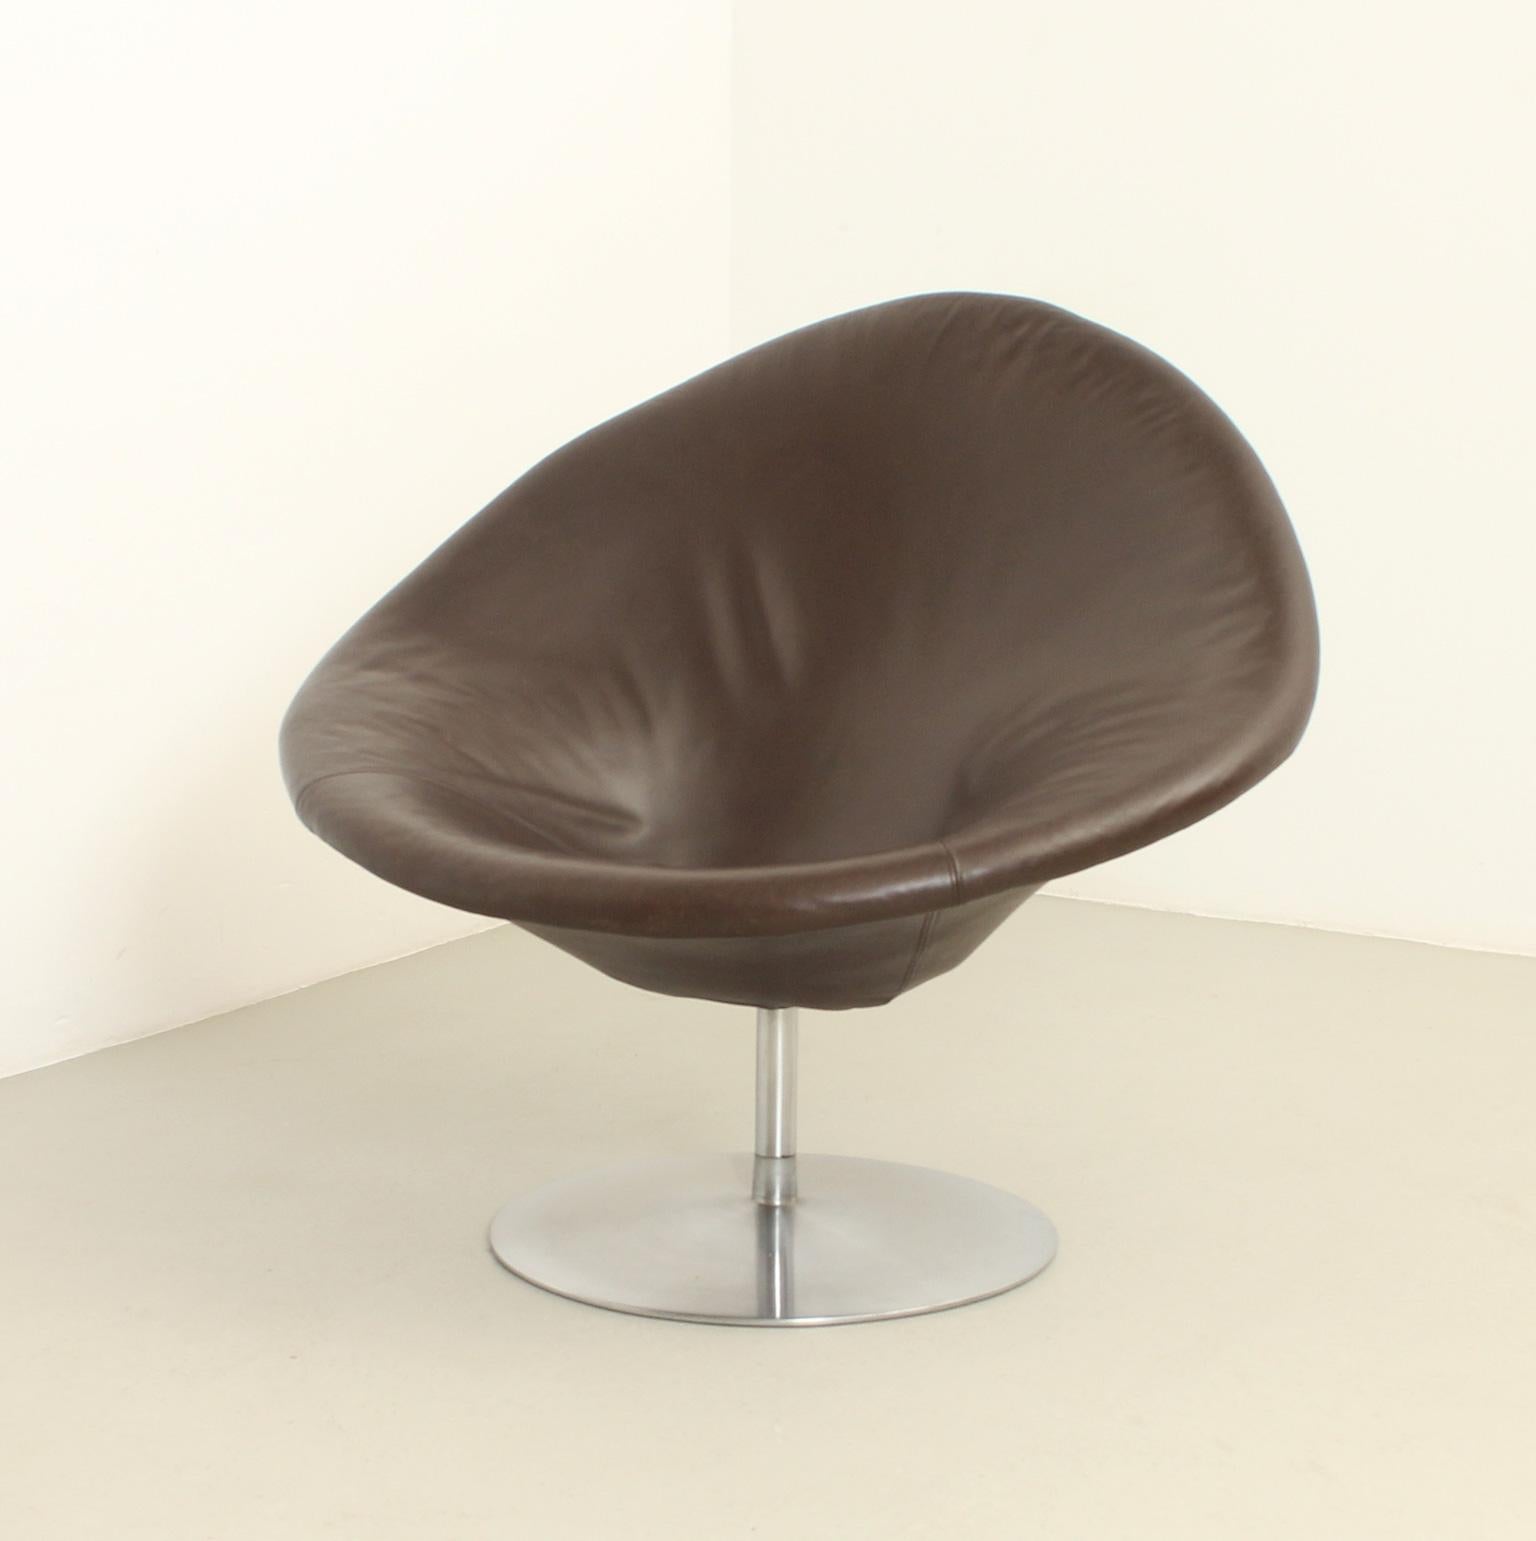 Globe chair model F422 designed by Pierre Paulin in 1959 for dutch company Artifort. Rare version upholstered in original chocolate brown leather with swivel steel base and very comfortable.